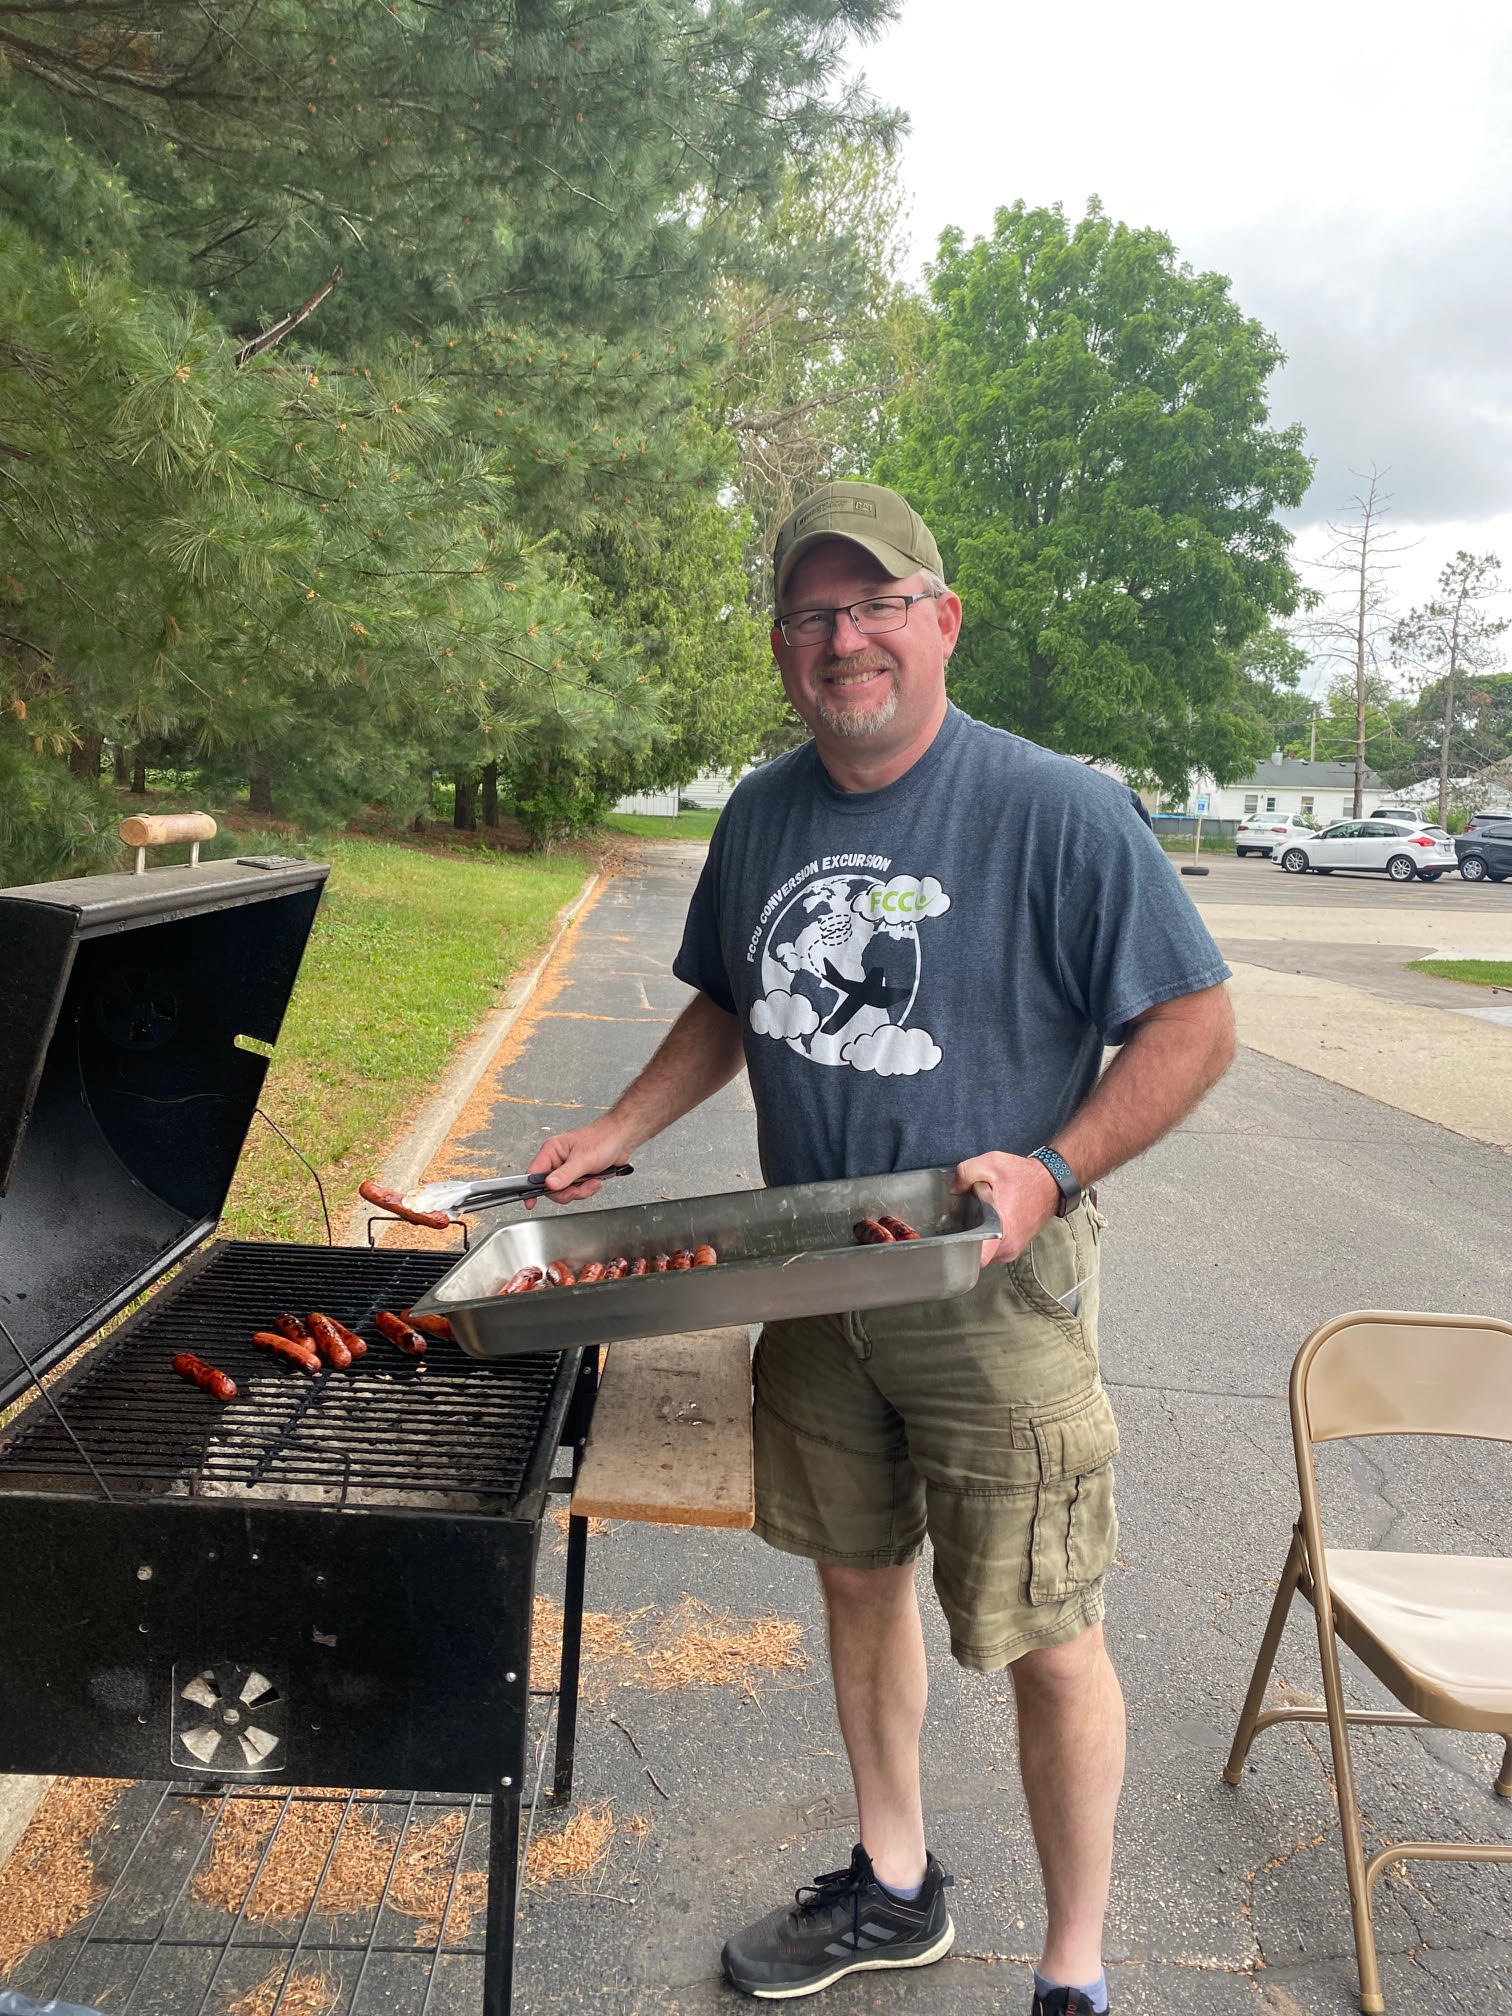 Rob Russell stands next to outdoor grill, grilling brats